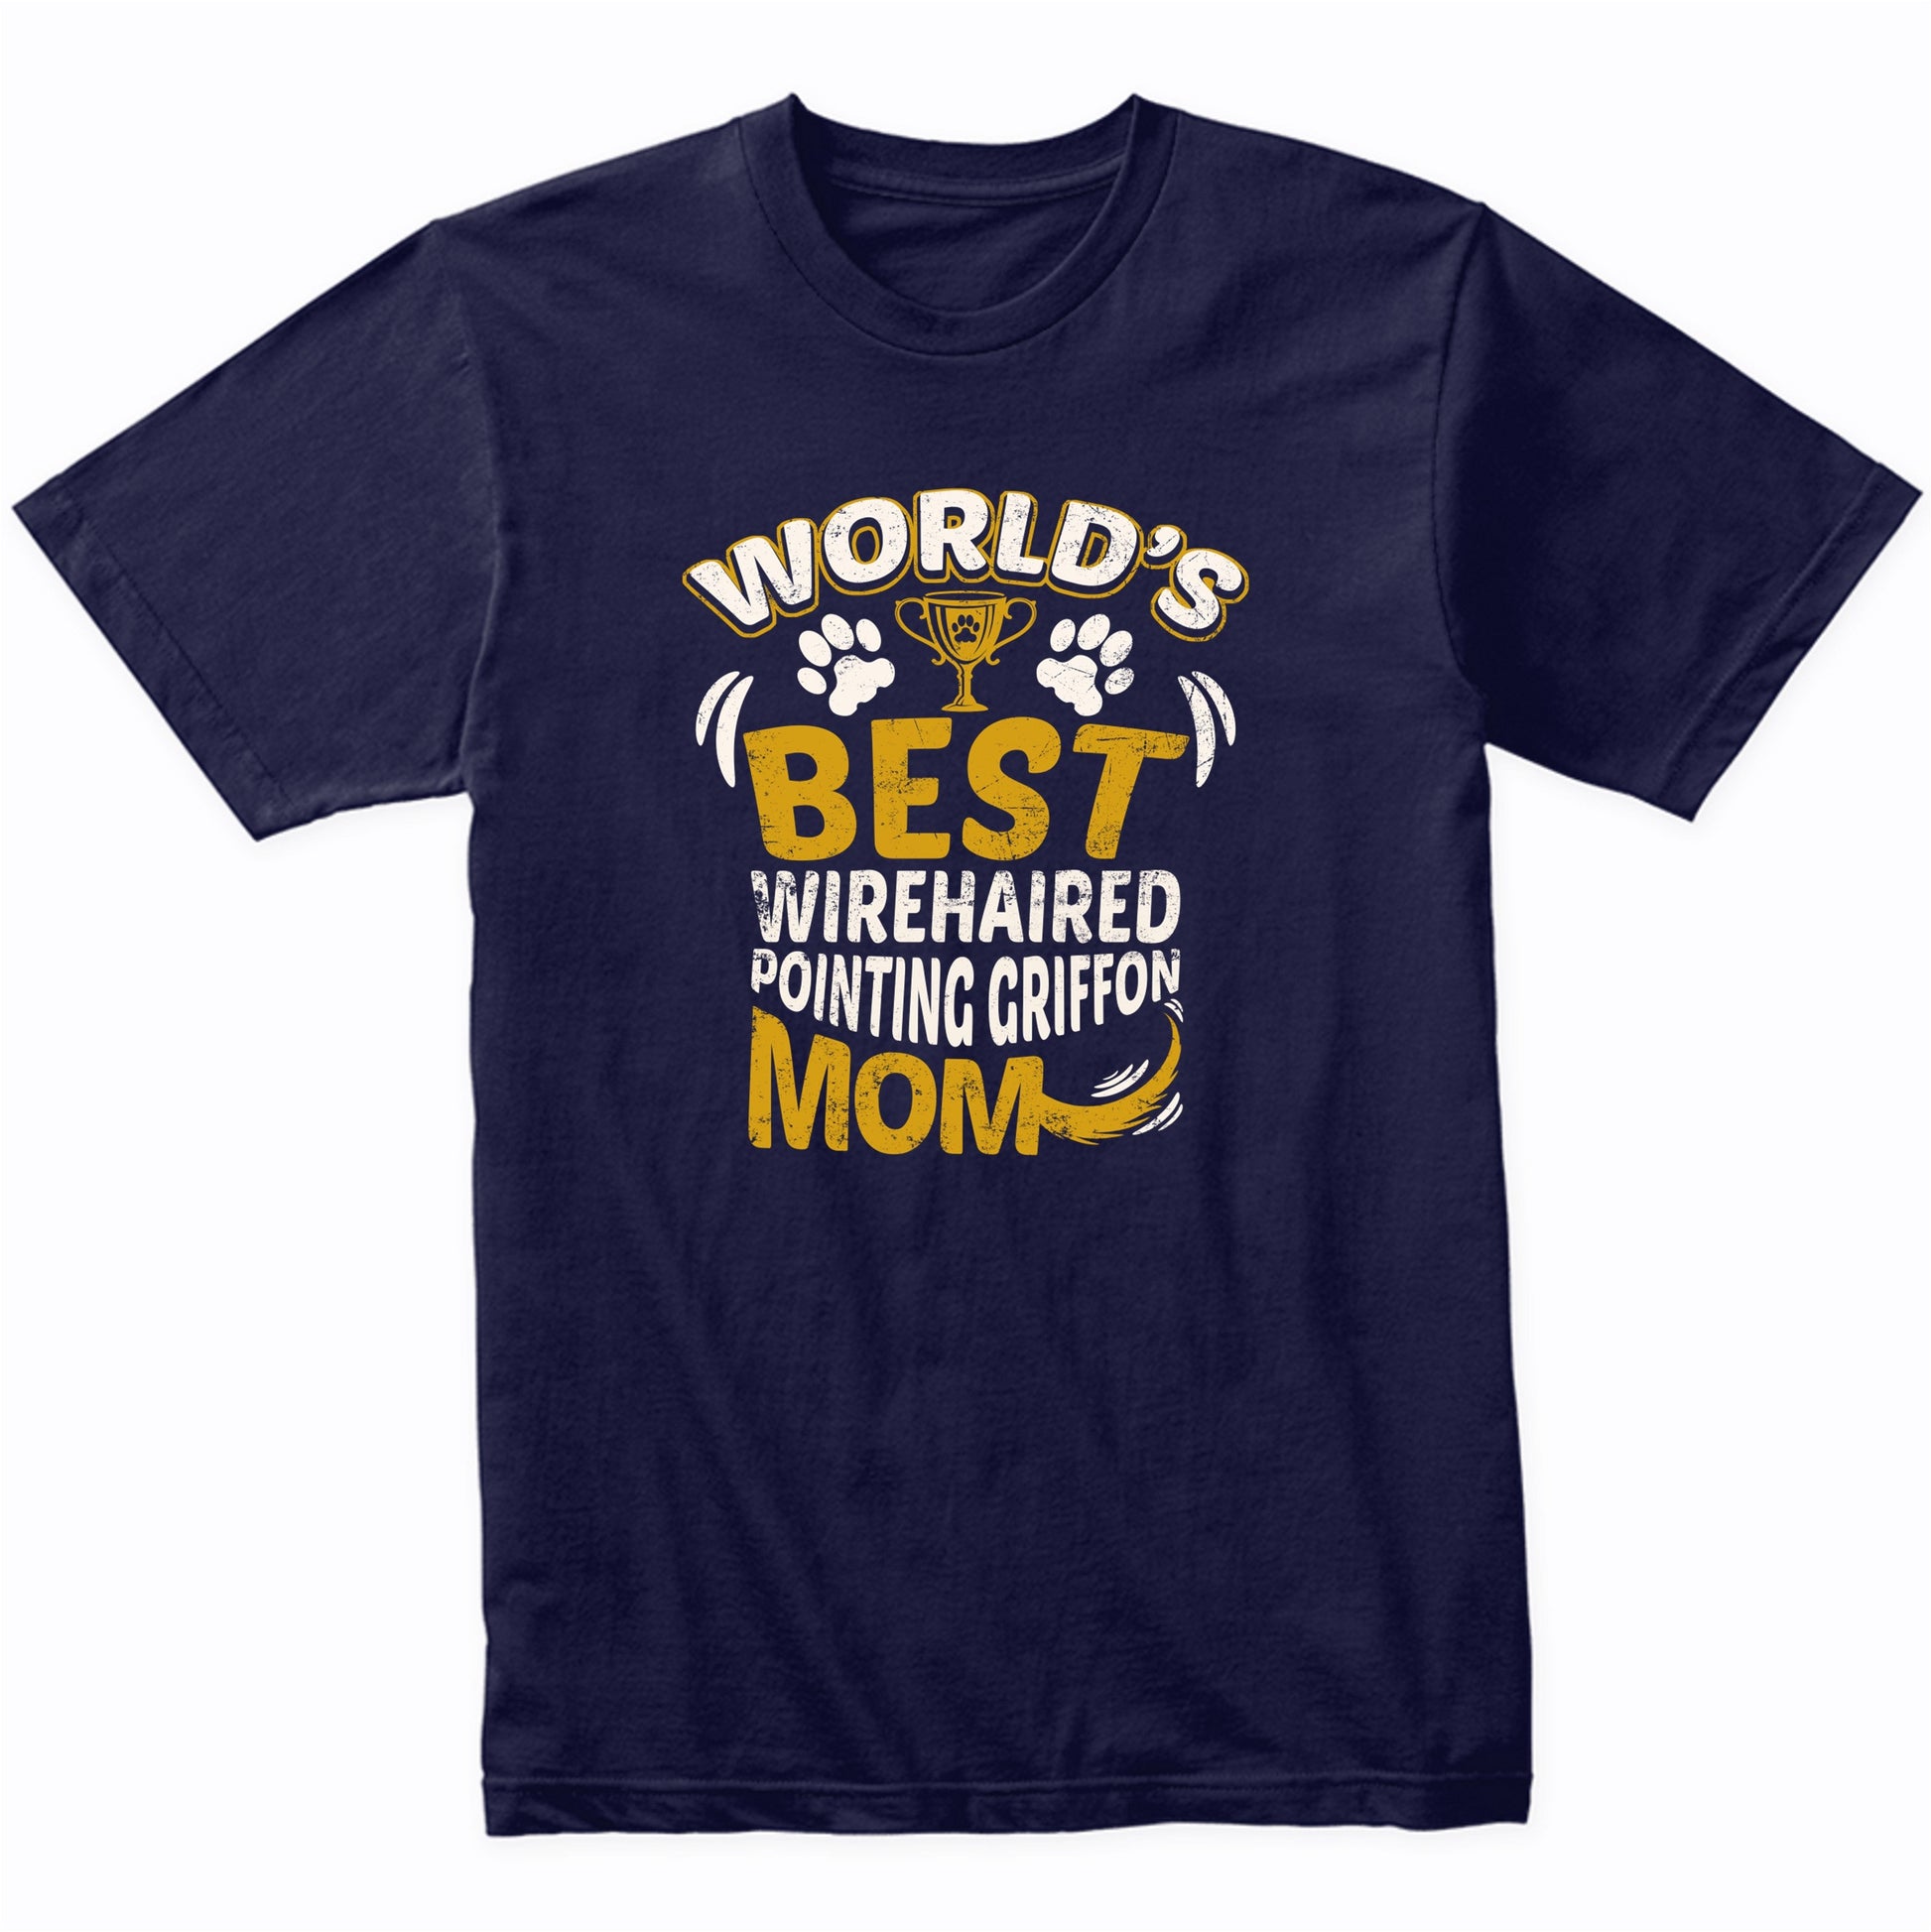 World's Best Wirehaired Pointing Griffon Mom Graphic T-Shirt